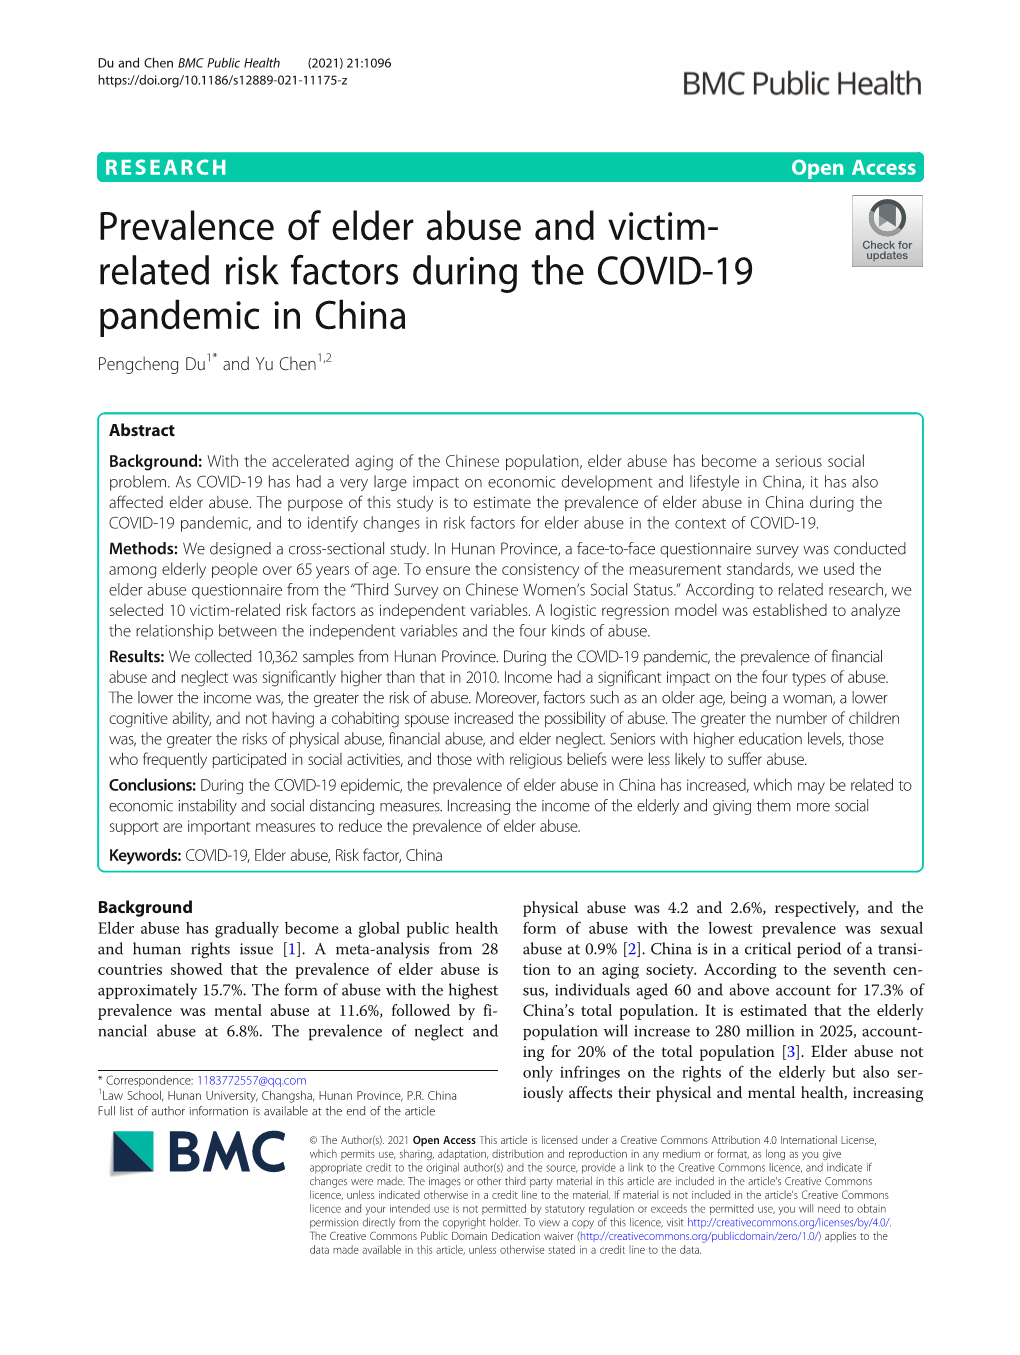 Prevalence of Elder Abuse and Victim-Related Risk Factors During the COVID-19 Pandemic in China